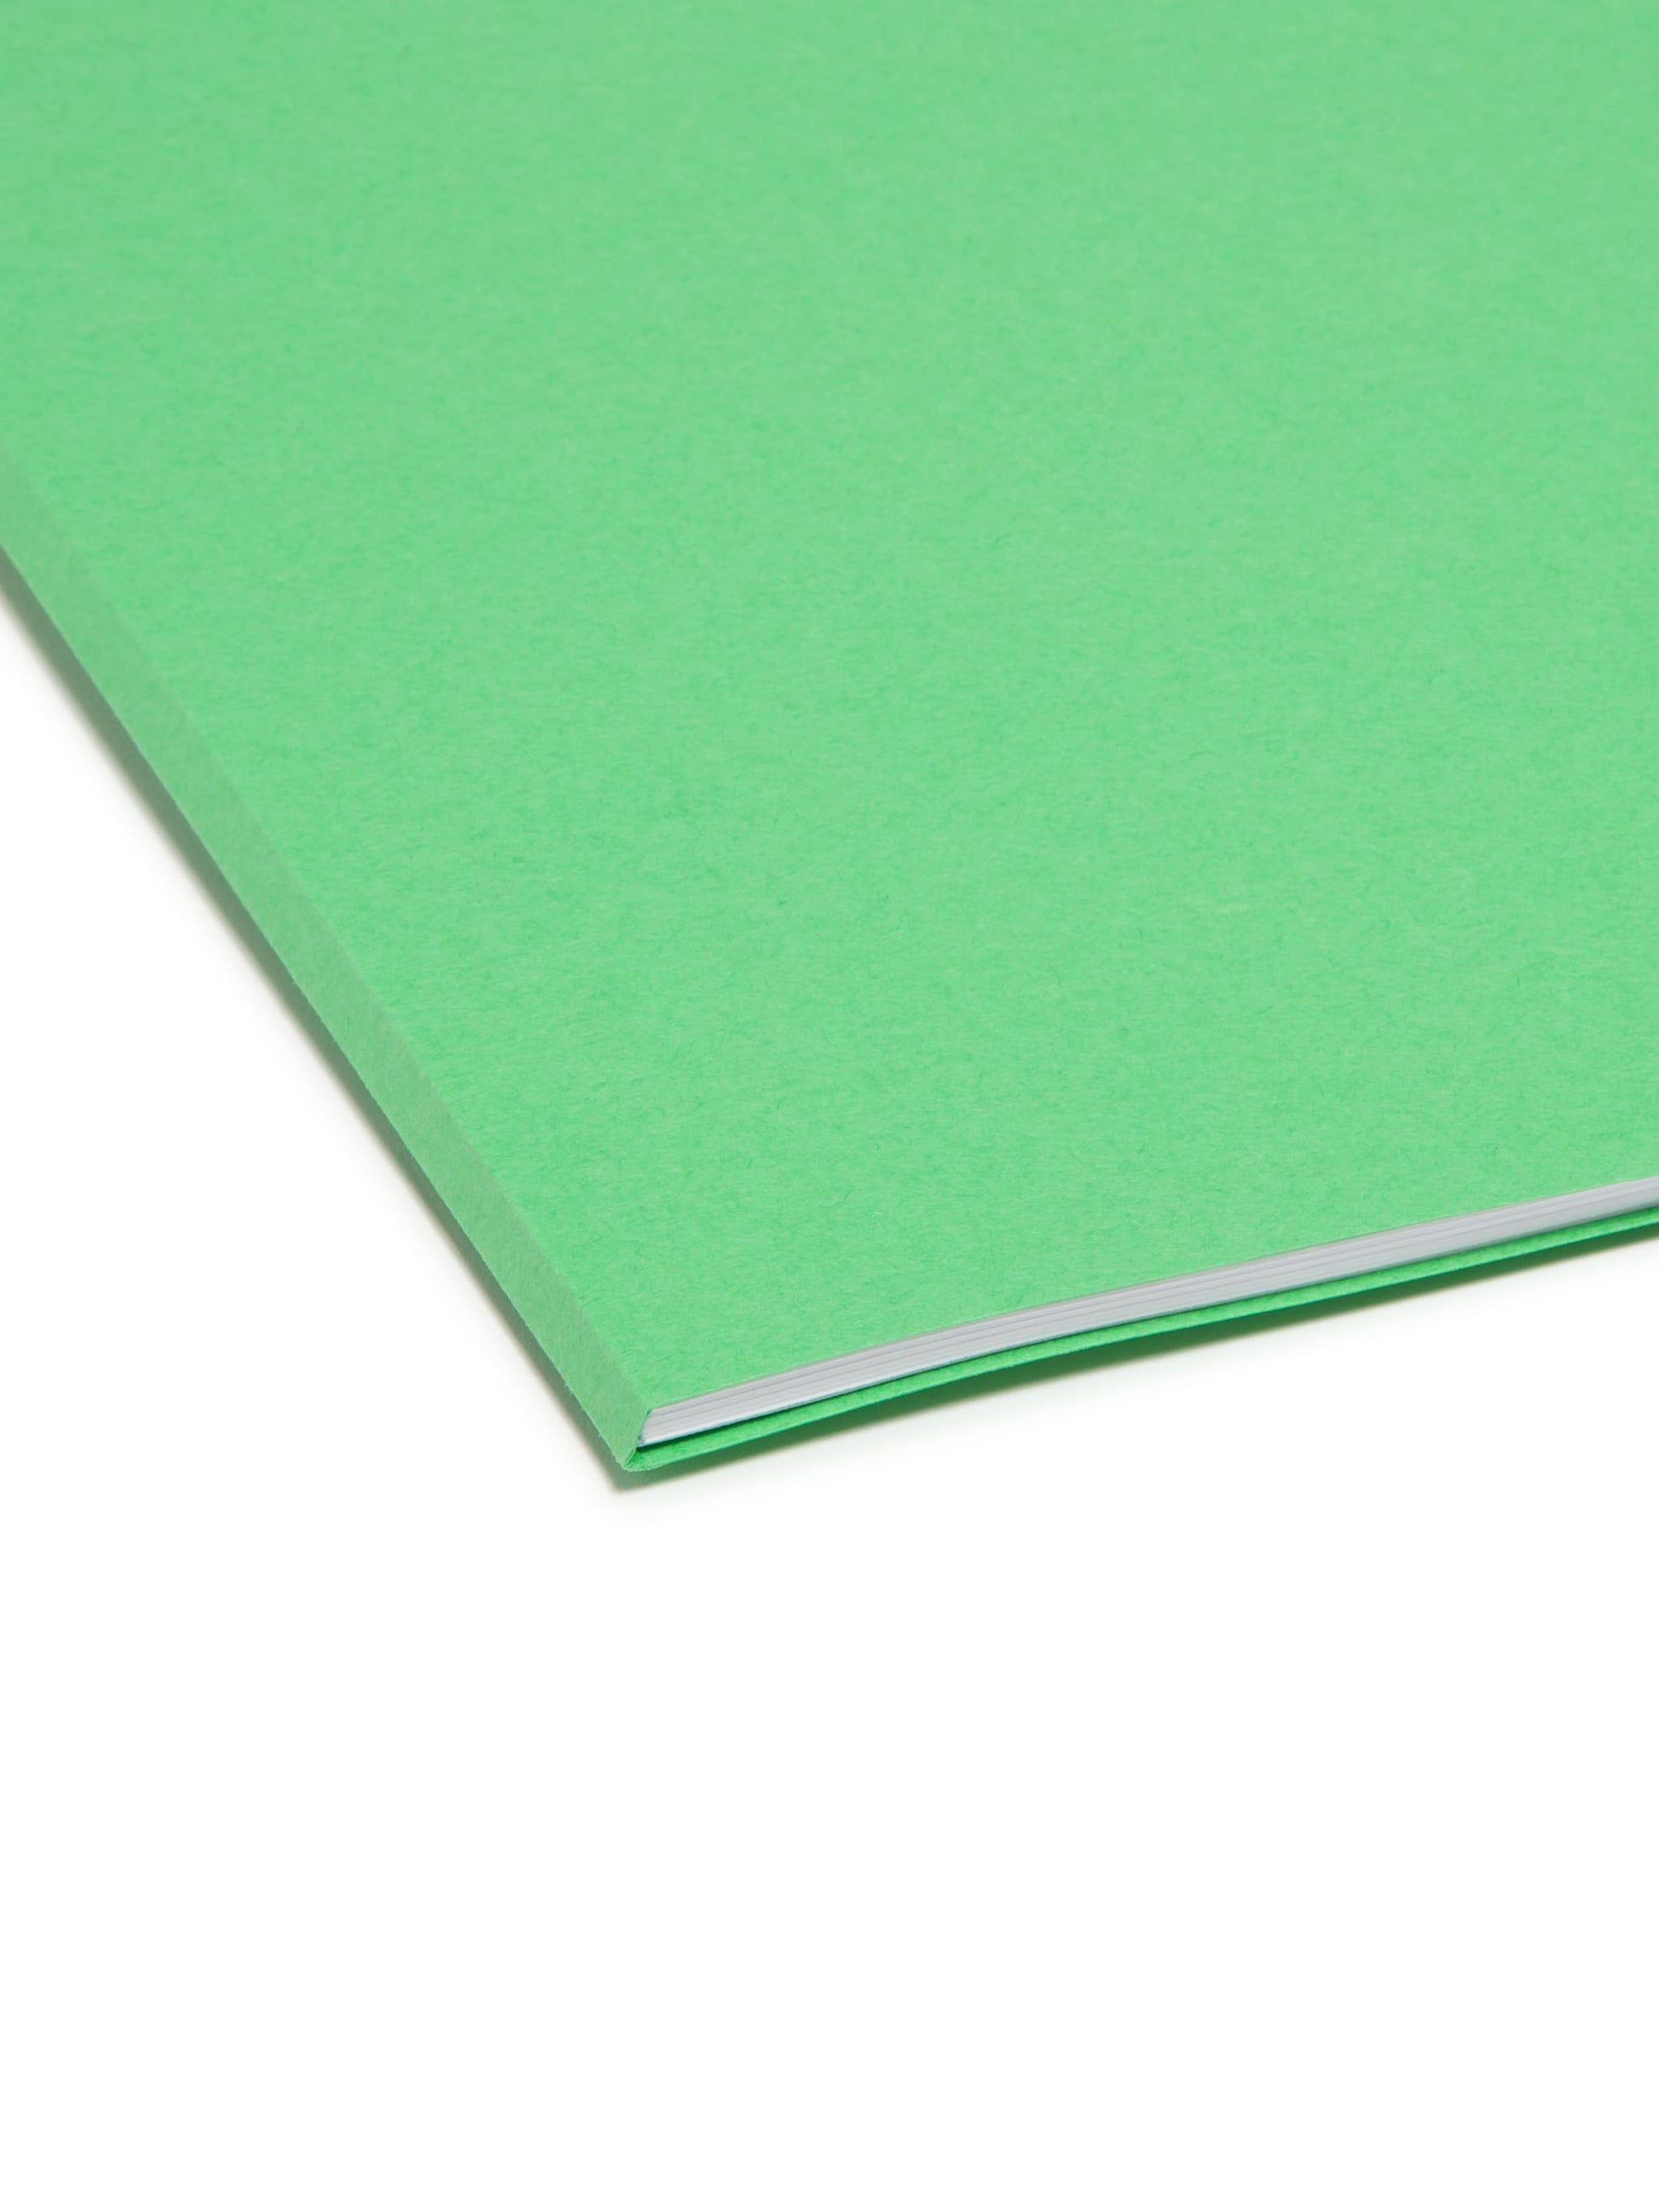 Reinforced Tab File Folders, Straight-Cut Tab, Green Color, Legal Size, Set of 100, 086486171106